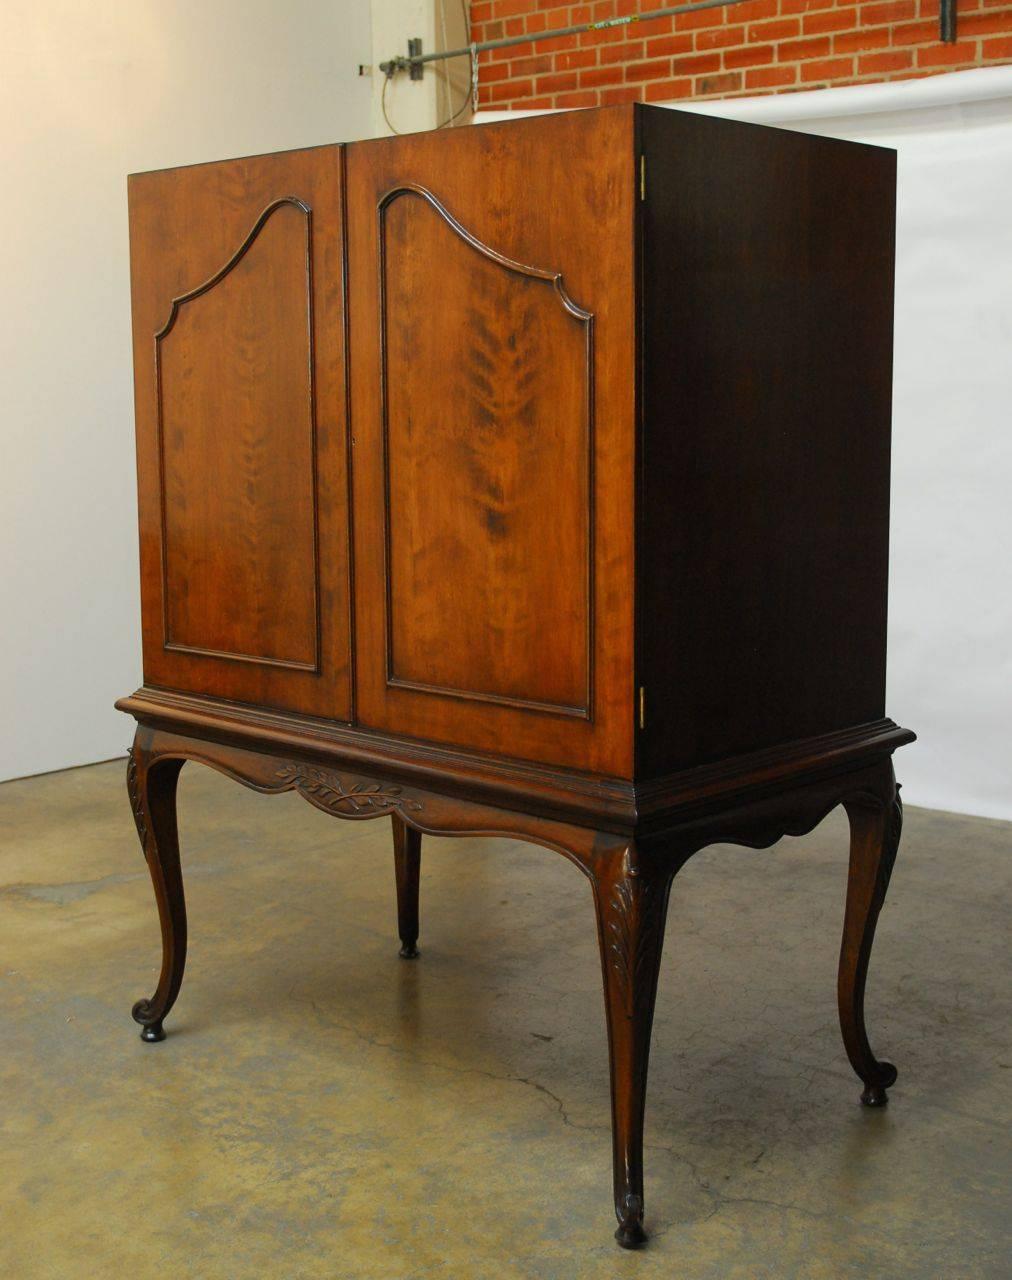 Extraordinary carved walnut cabinet on a carved stand made in the French Louis XV style featuring cabriole legs and scalloped sides. Fronted by two large doors, this cabinet would make a great armoire, desk, or cocktail dry bar. It has a slide out